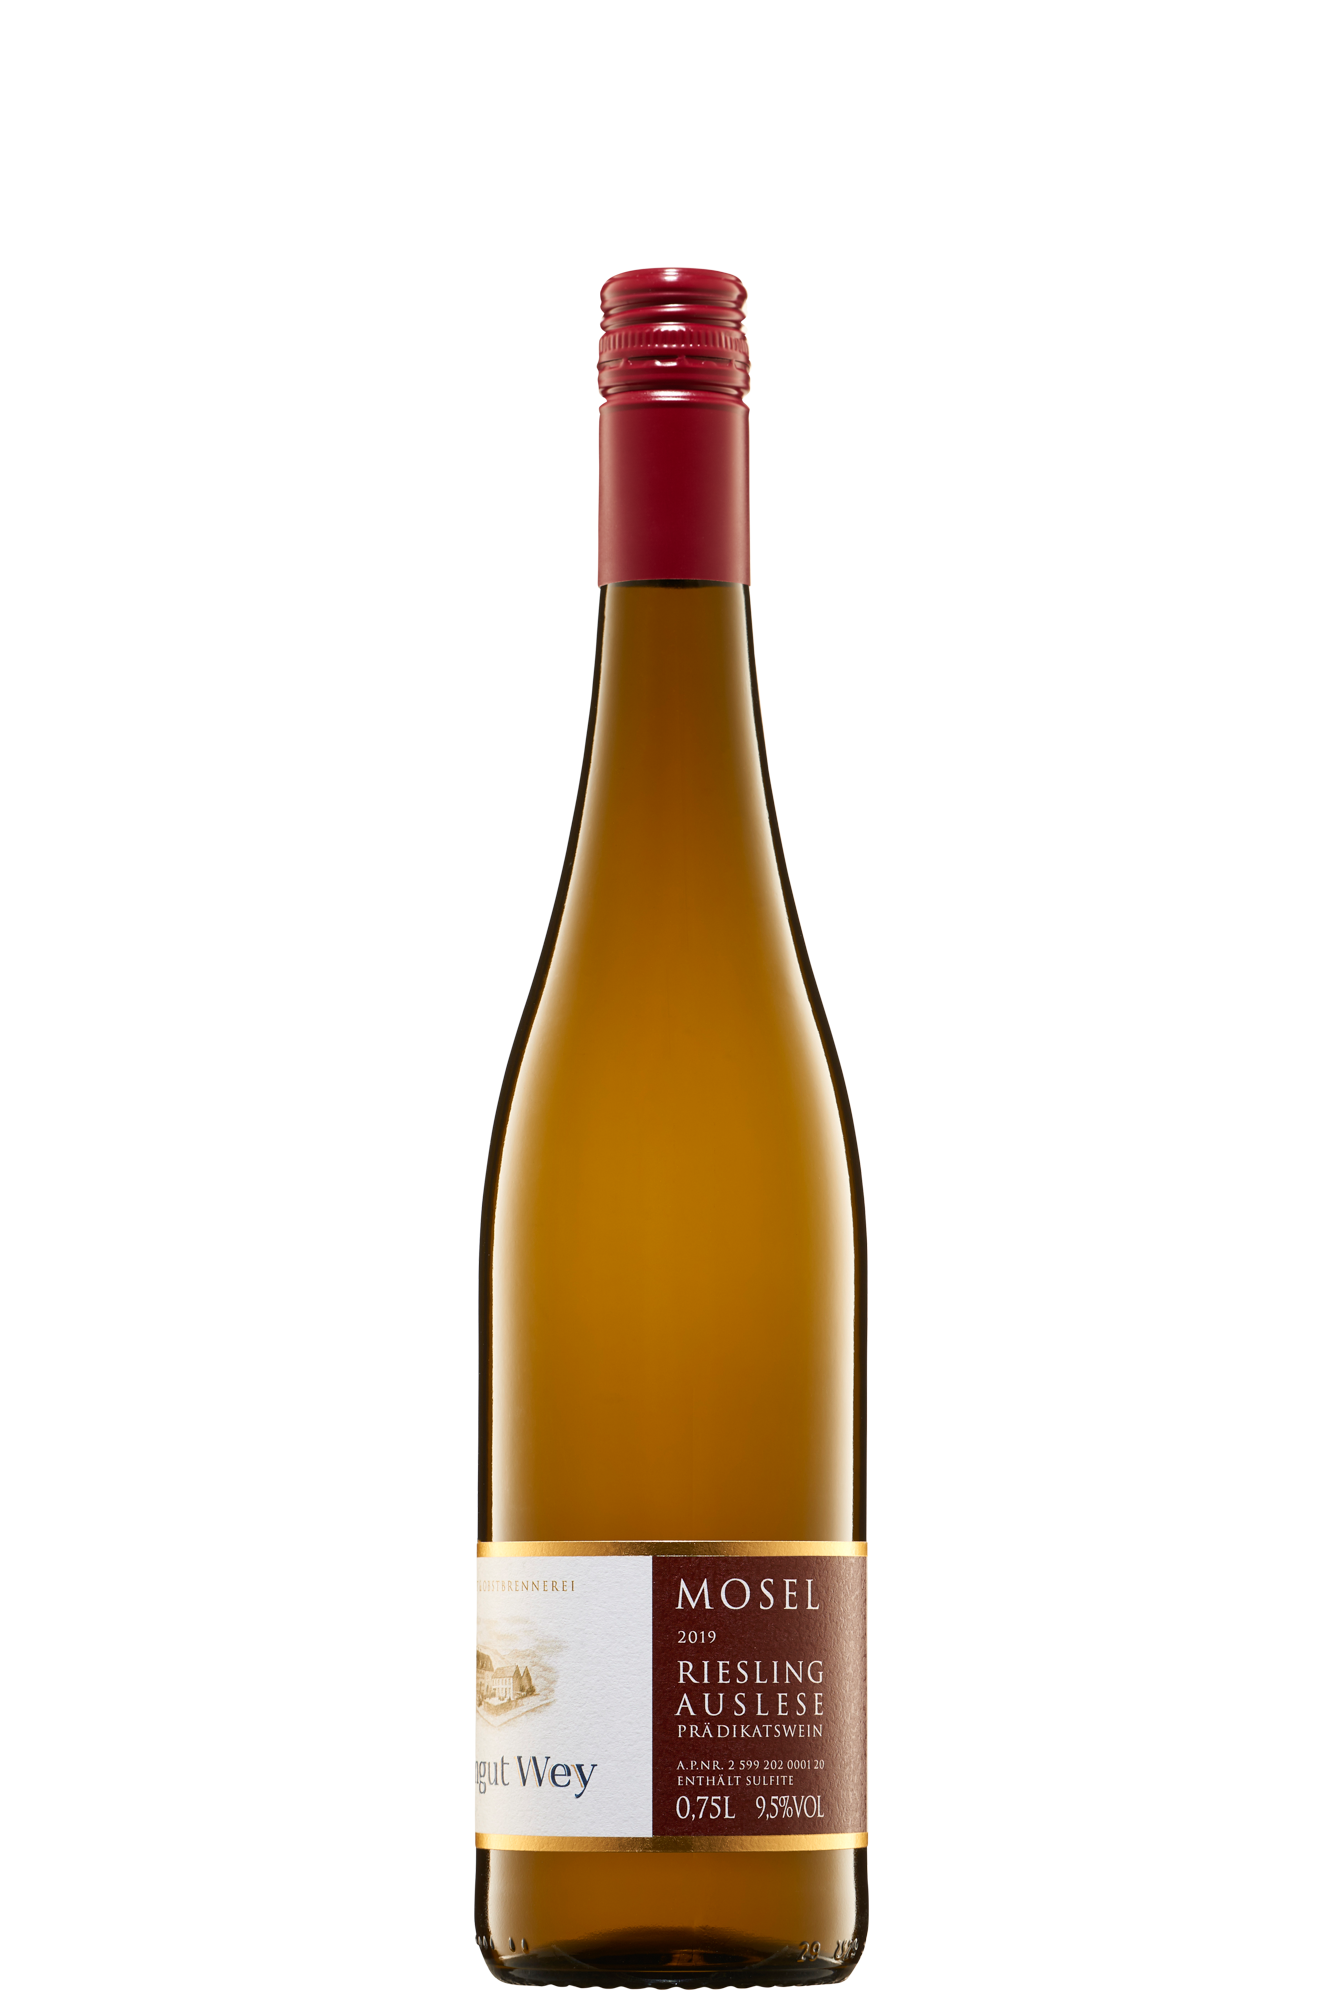 Mosel Riesling Auslese Weingut Wey